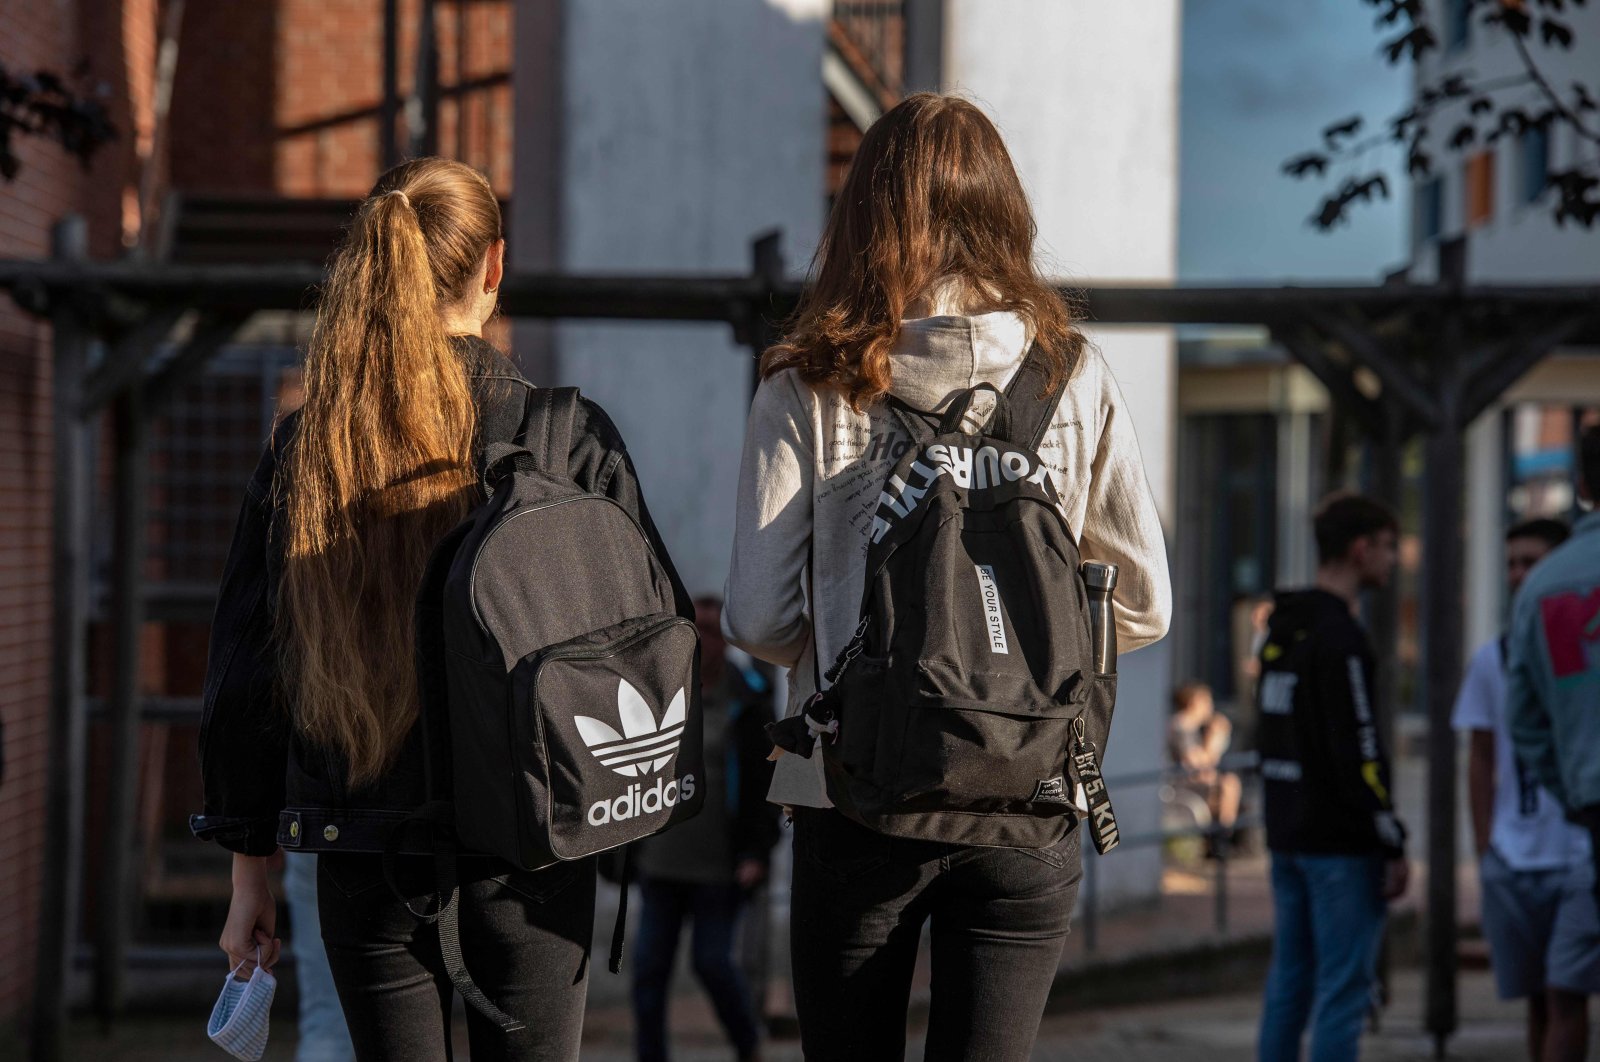 A student (L) carries a face mask as she heads into the Christophorusschule school in Rostock on Aug. 3, 2020. (AFP Photo)